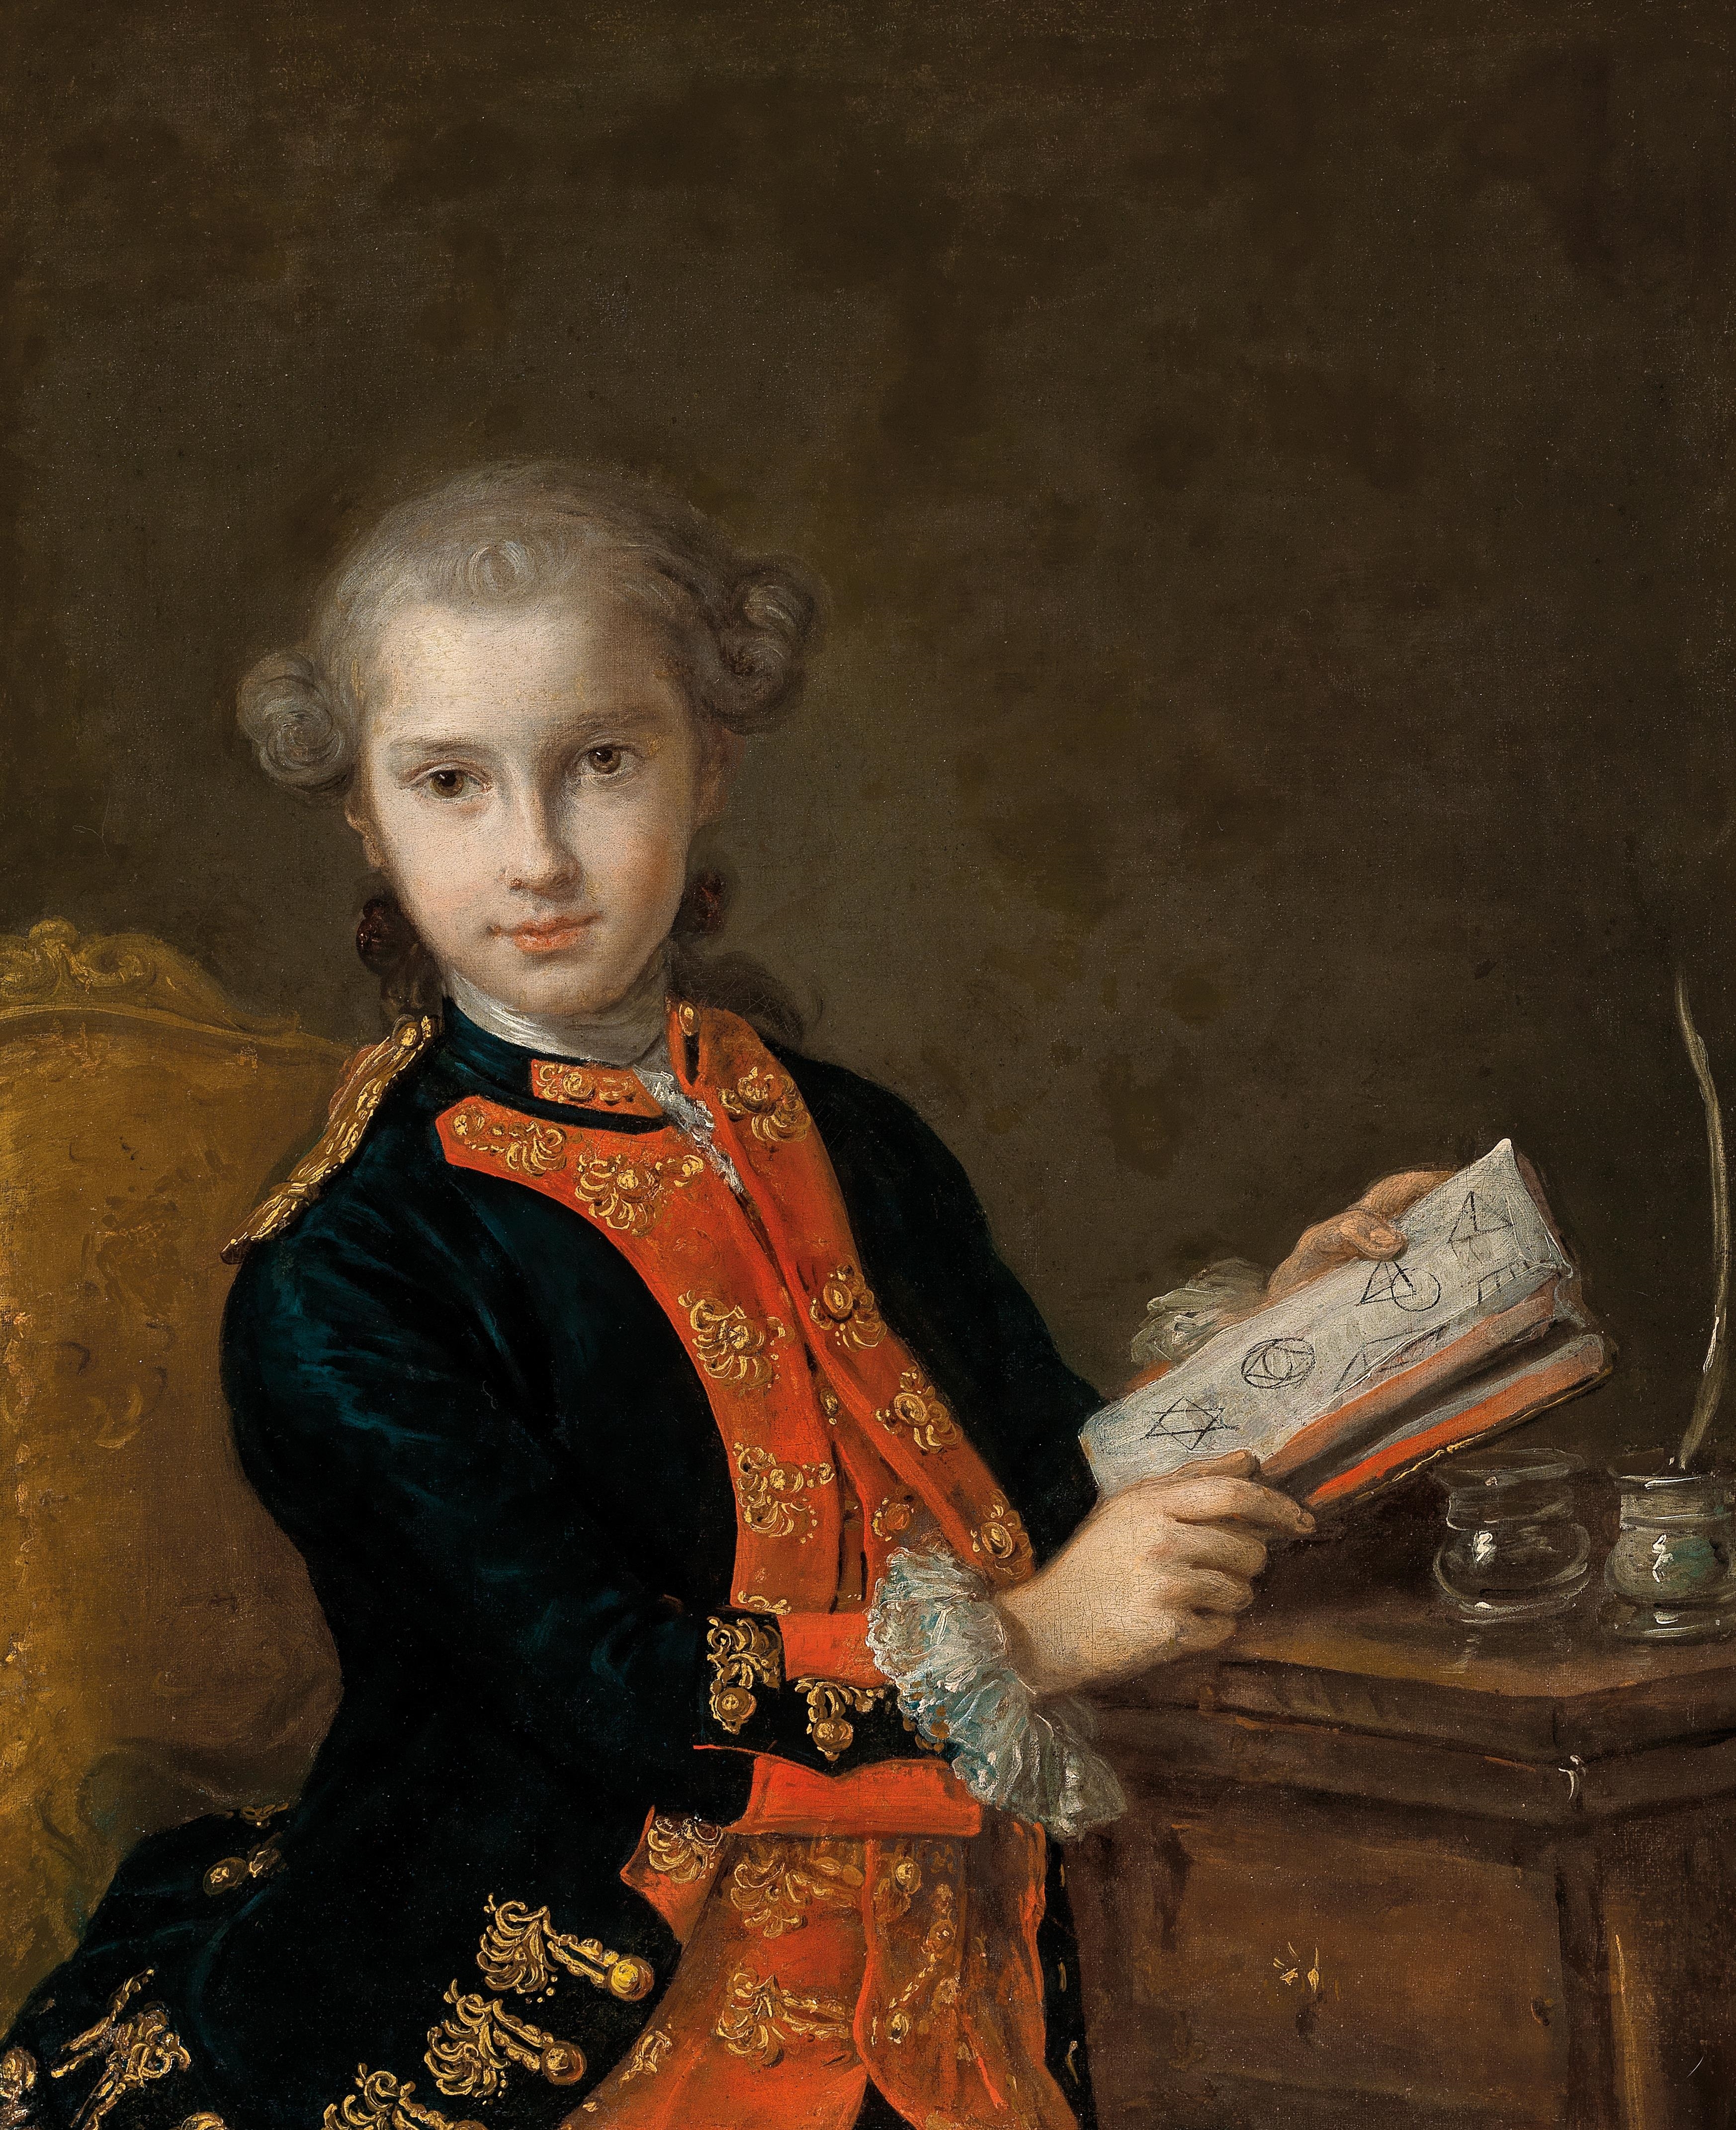 Portrait of a young boy, possibly Carlo Vanvitelli (1739-1821) by Giuseppe Bonito